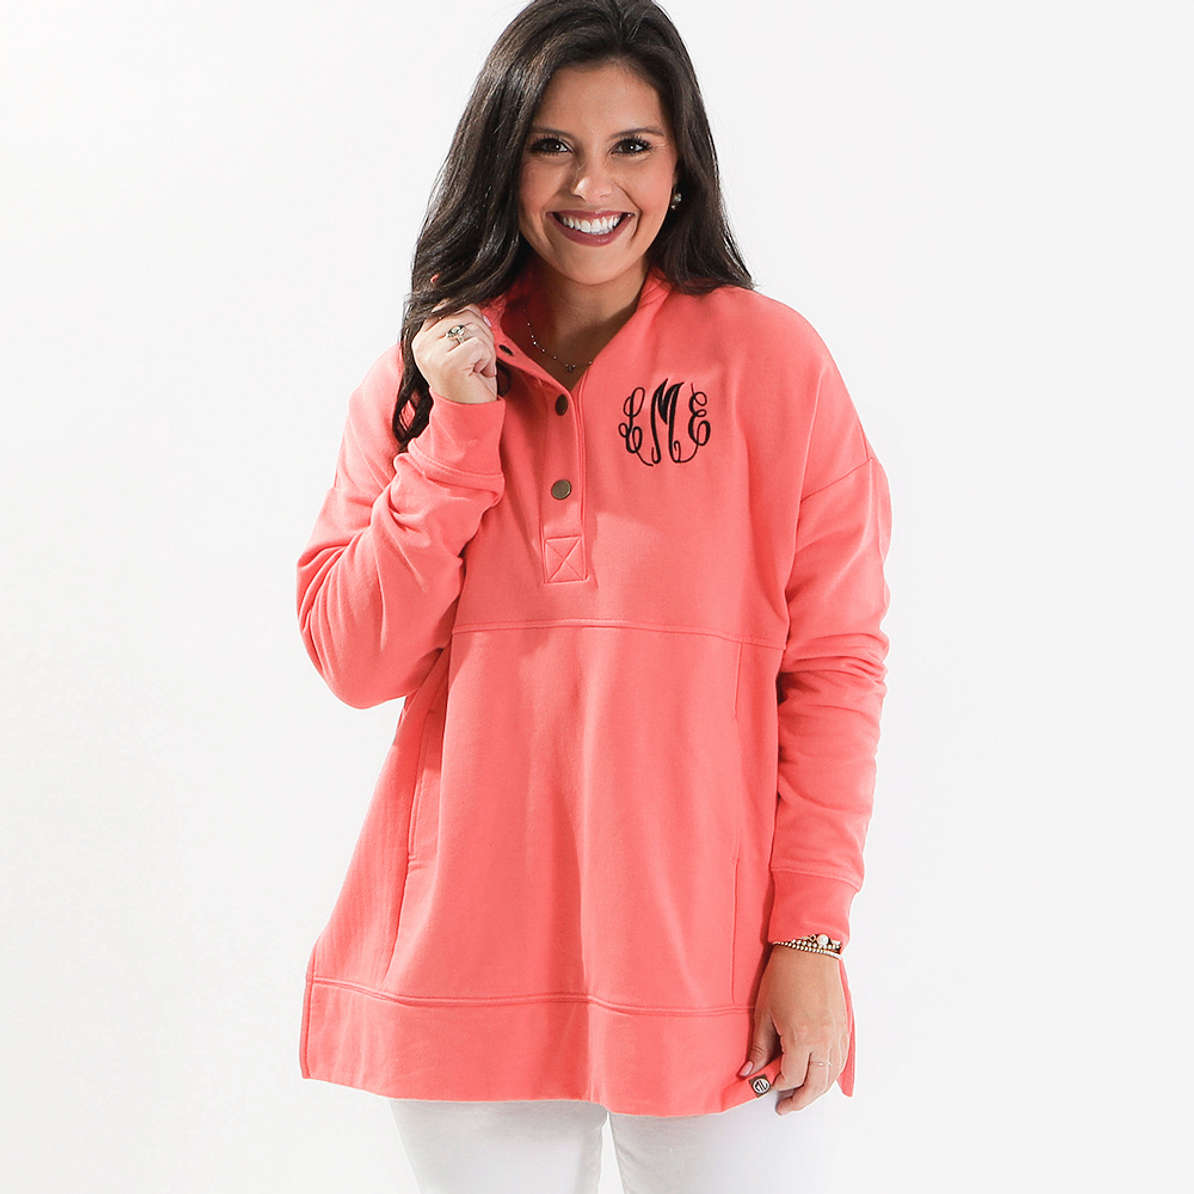 Personalized Pullover Tunic | Marleylilly